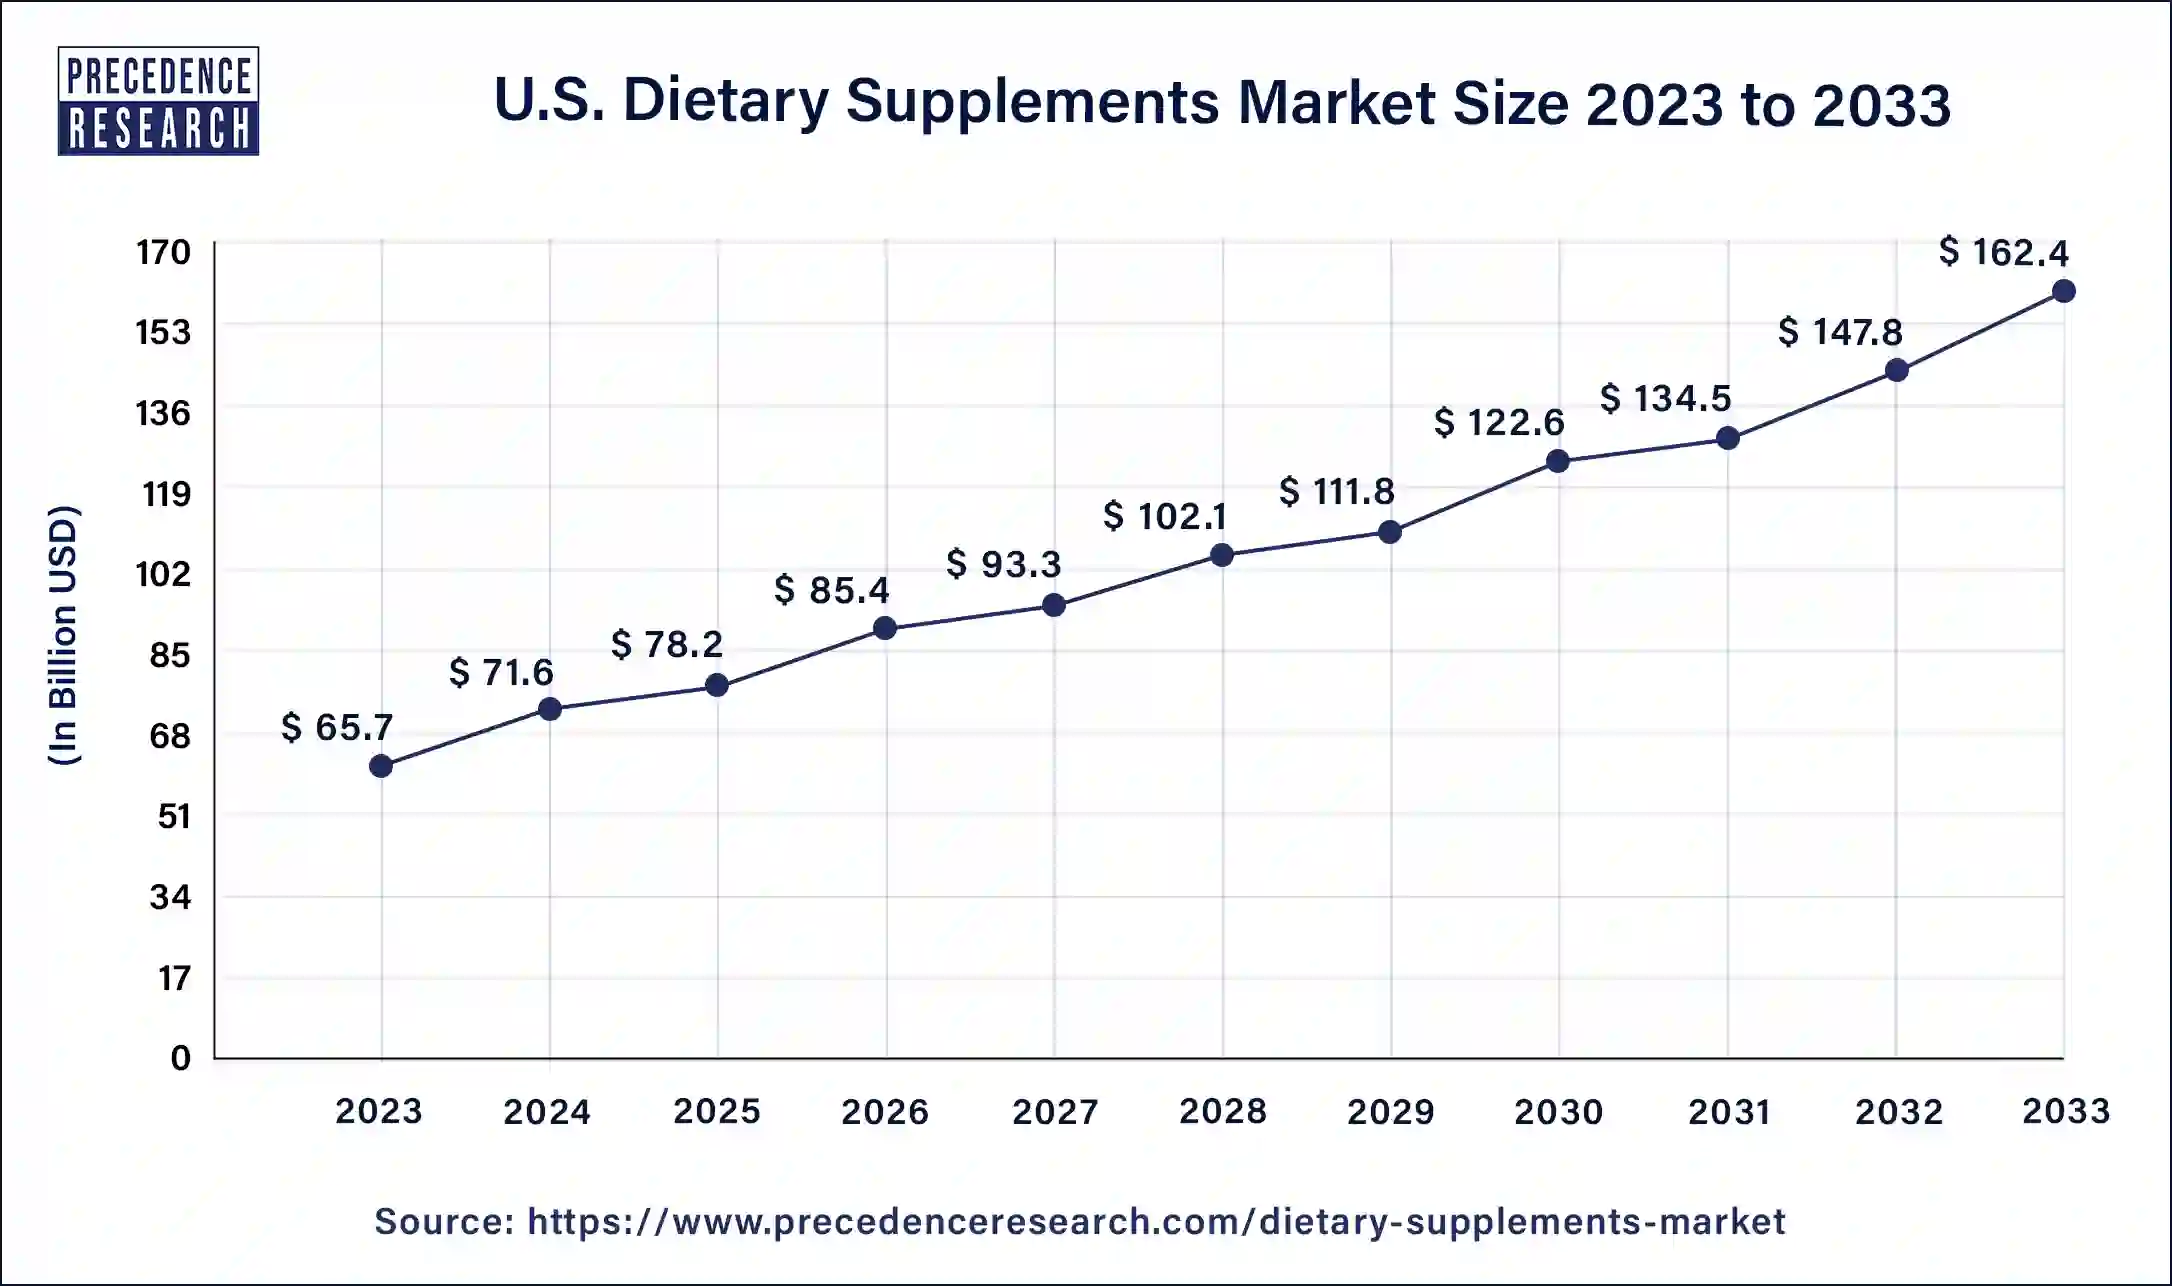 U.S. Dietary Supplements Market Size 2024 to 2033